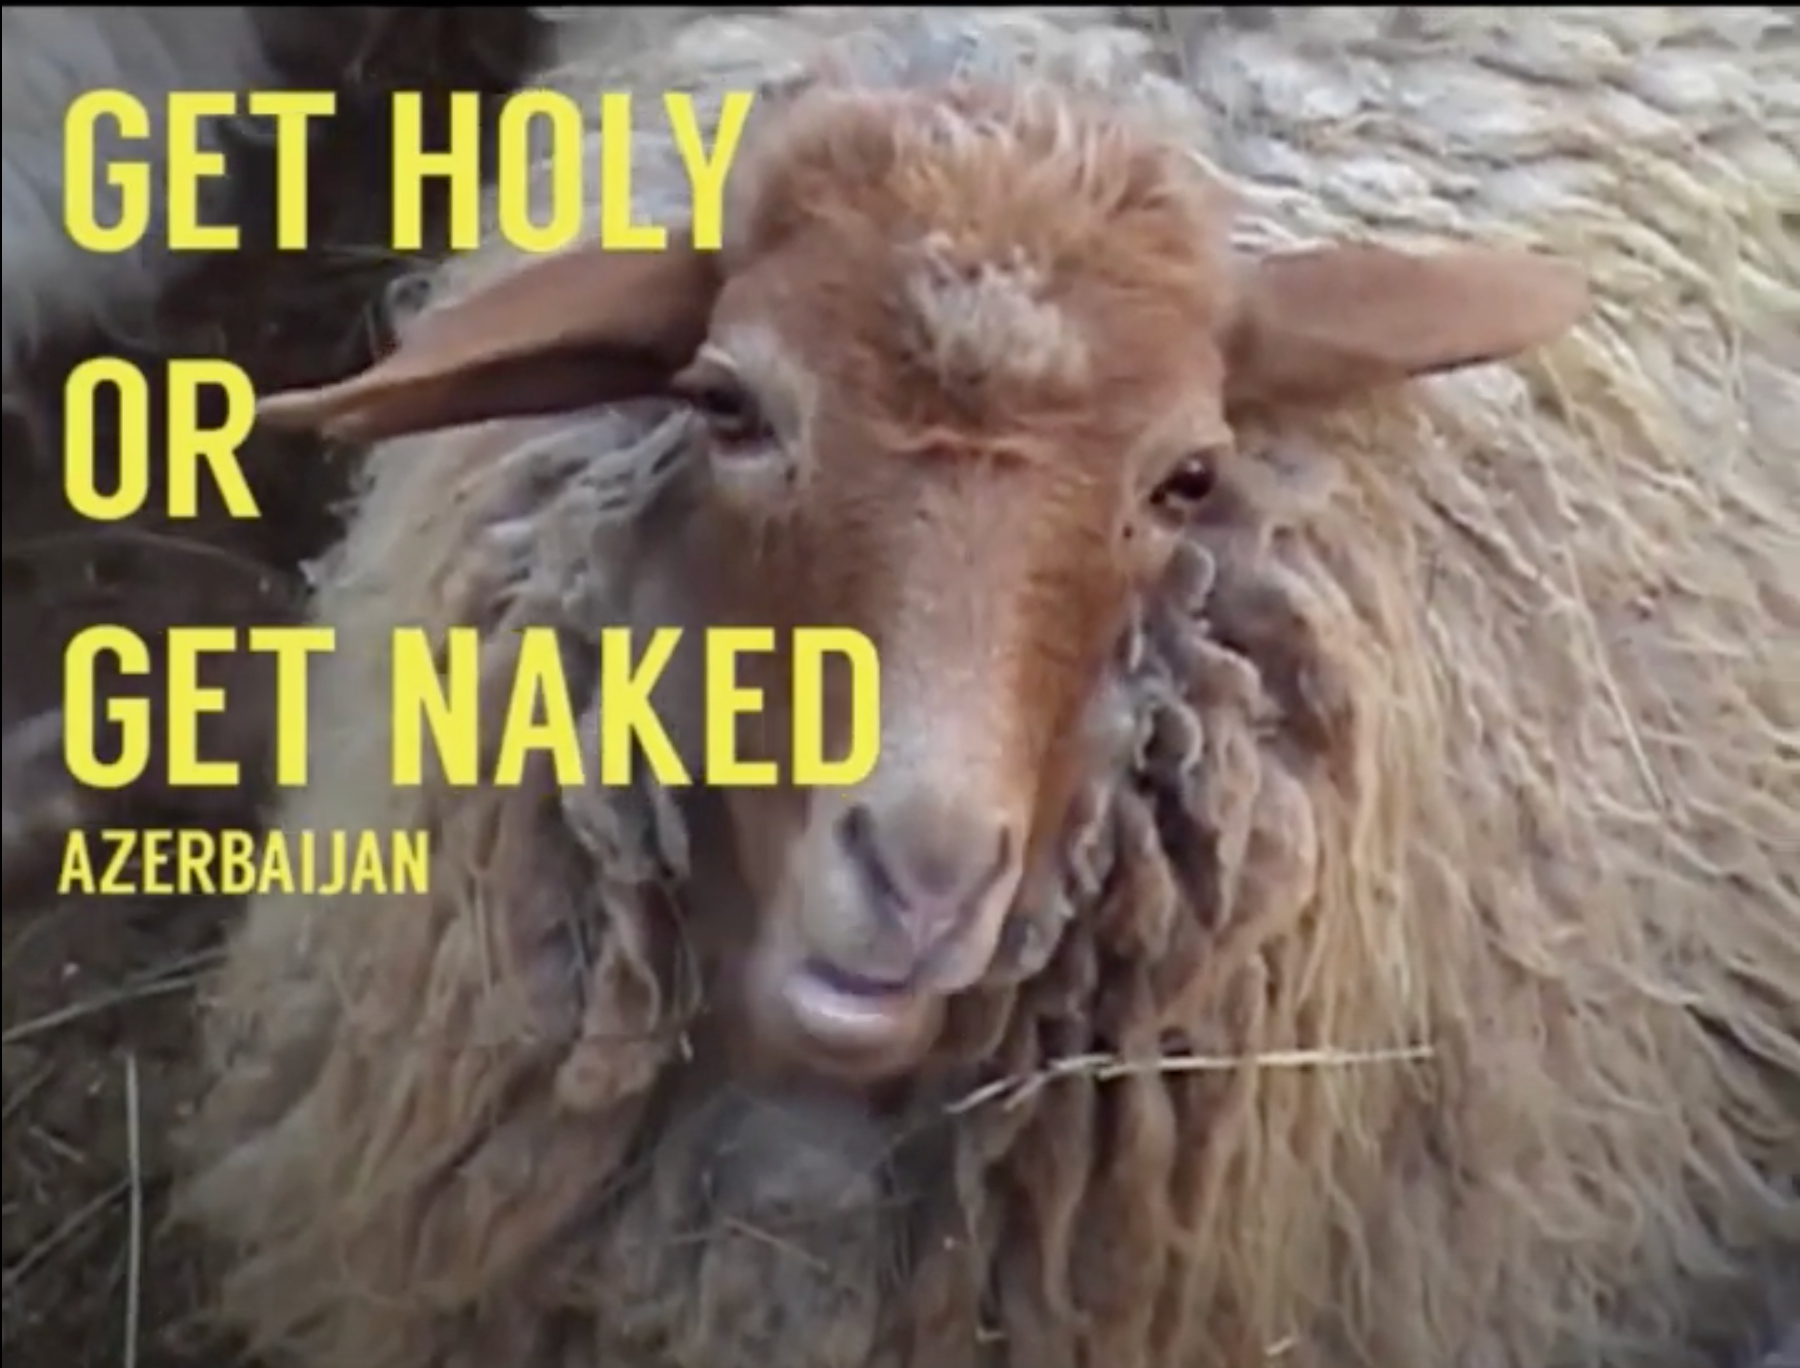 GET NAKED OR GET HOLY. LO-FI ROAD TRIP TO AZERBAIJAN . WINTER 18/19